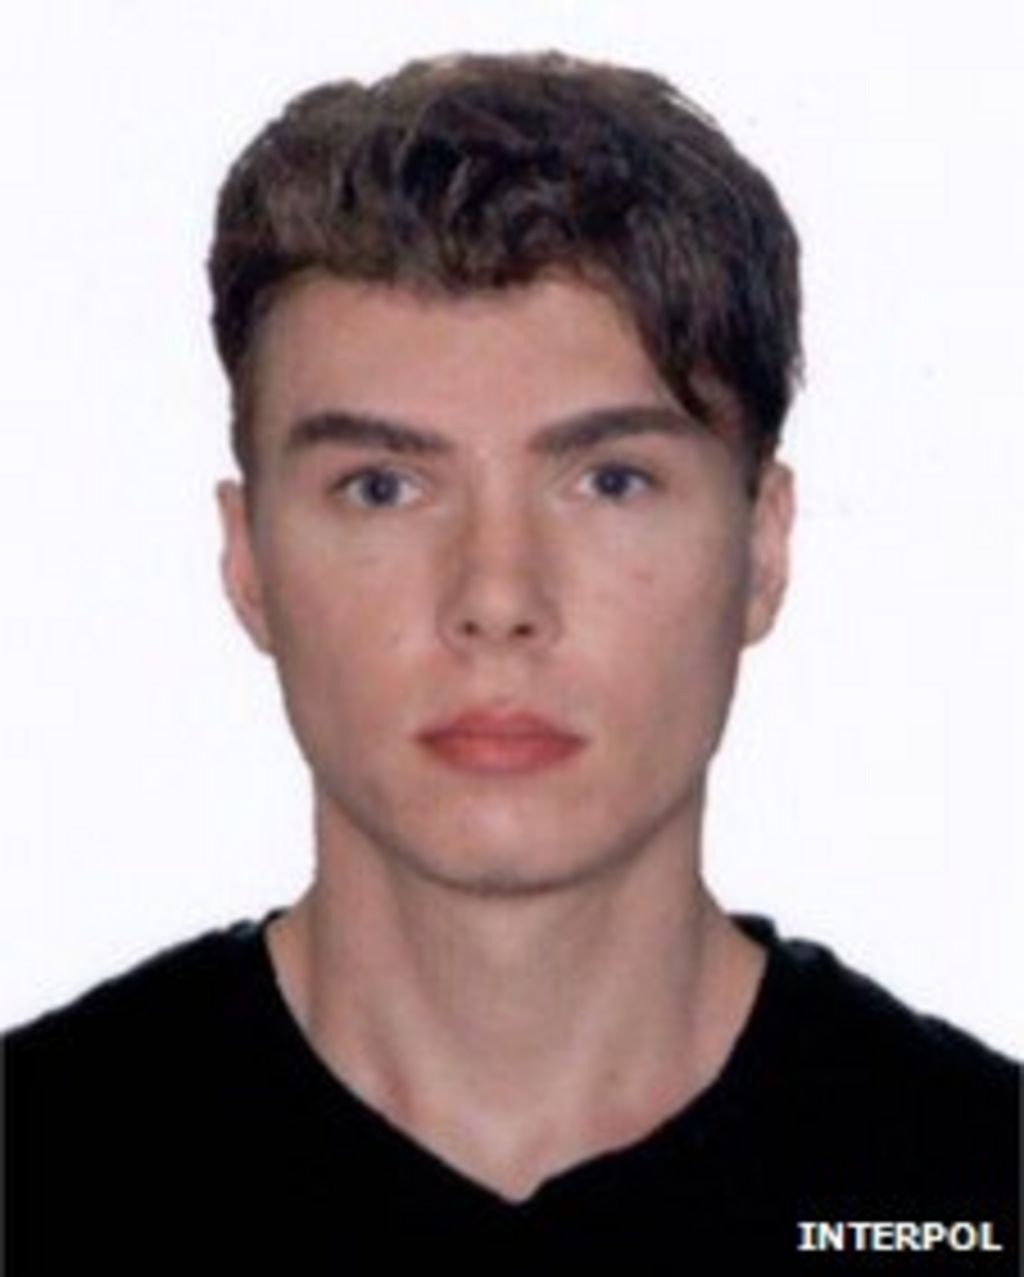 Luka Magnotta case 'Gore' website owner charged in Canada BBC News